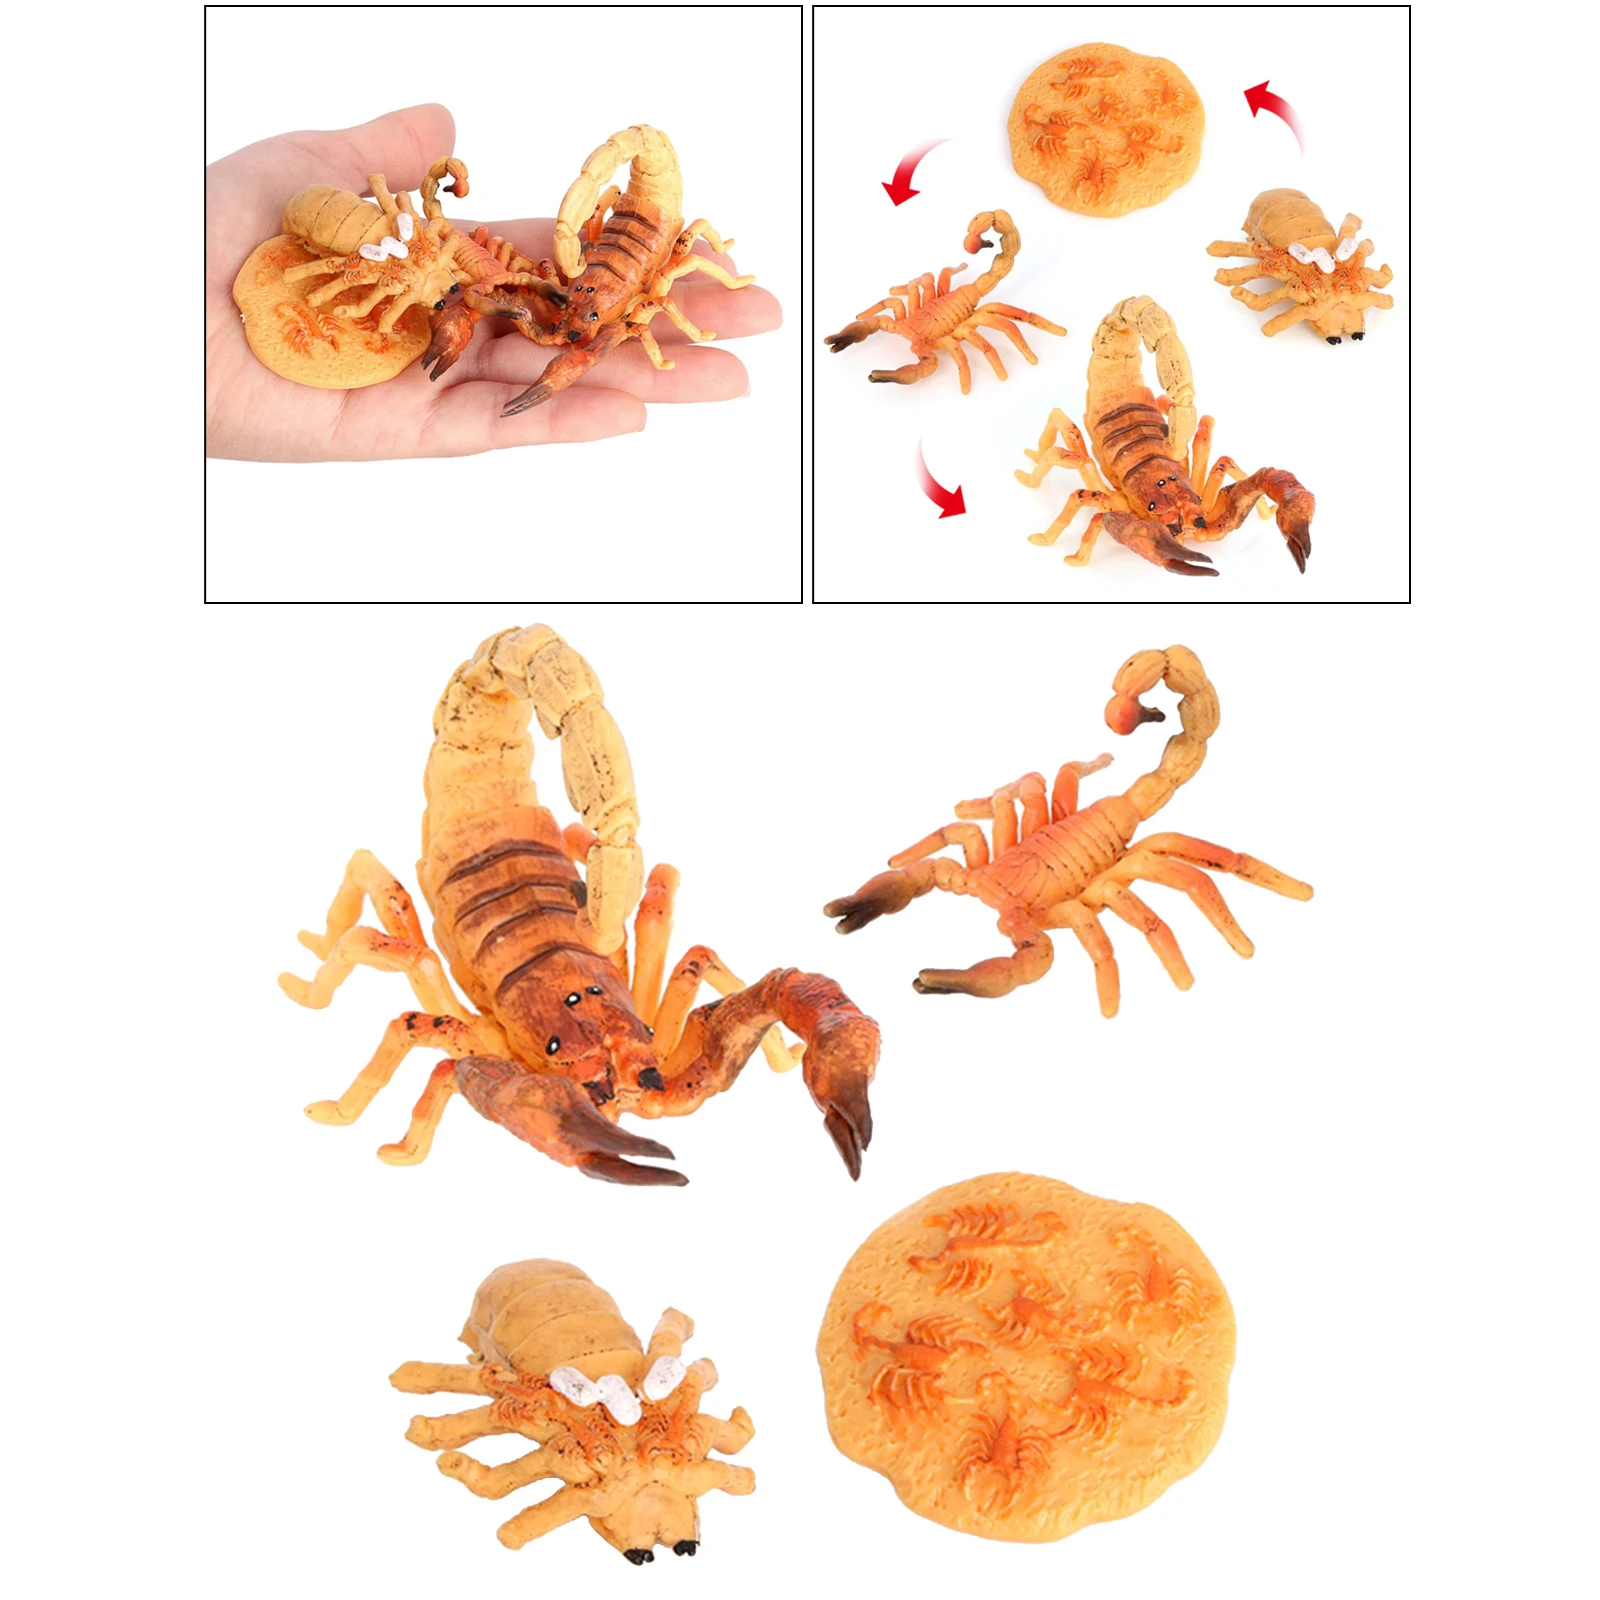 4 Stages Life Cycle of Scorpion Nature Insects Life Cycles Growth Model Game Prop Insect Animal Natural Toy